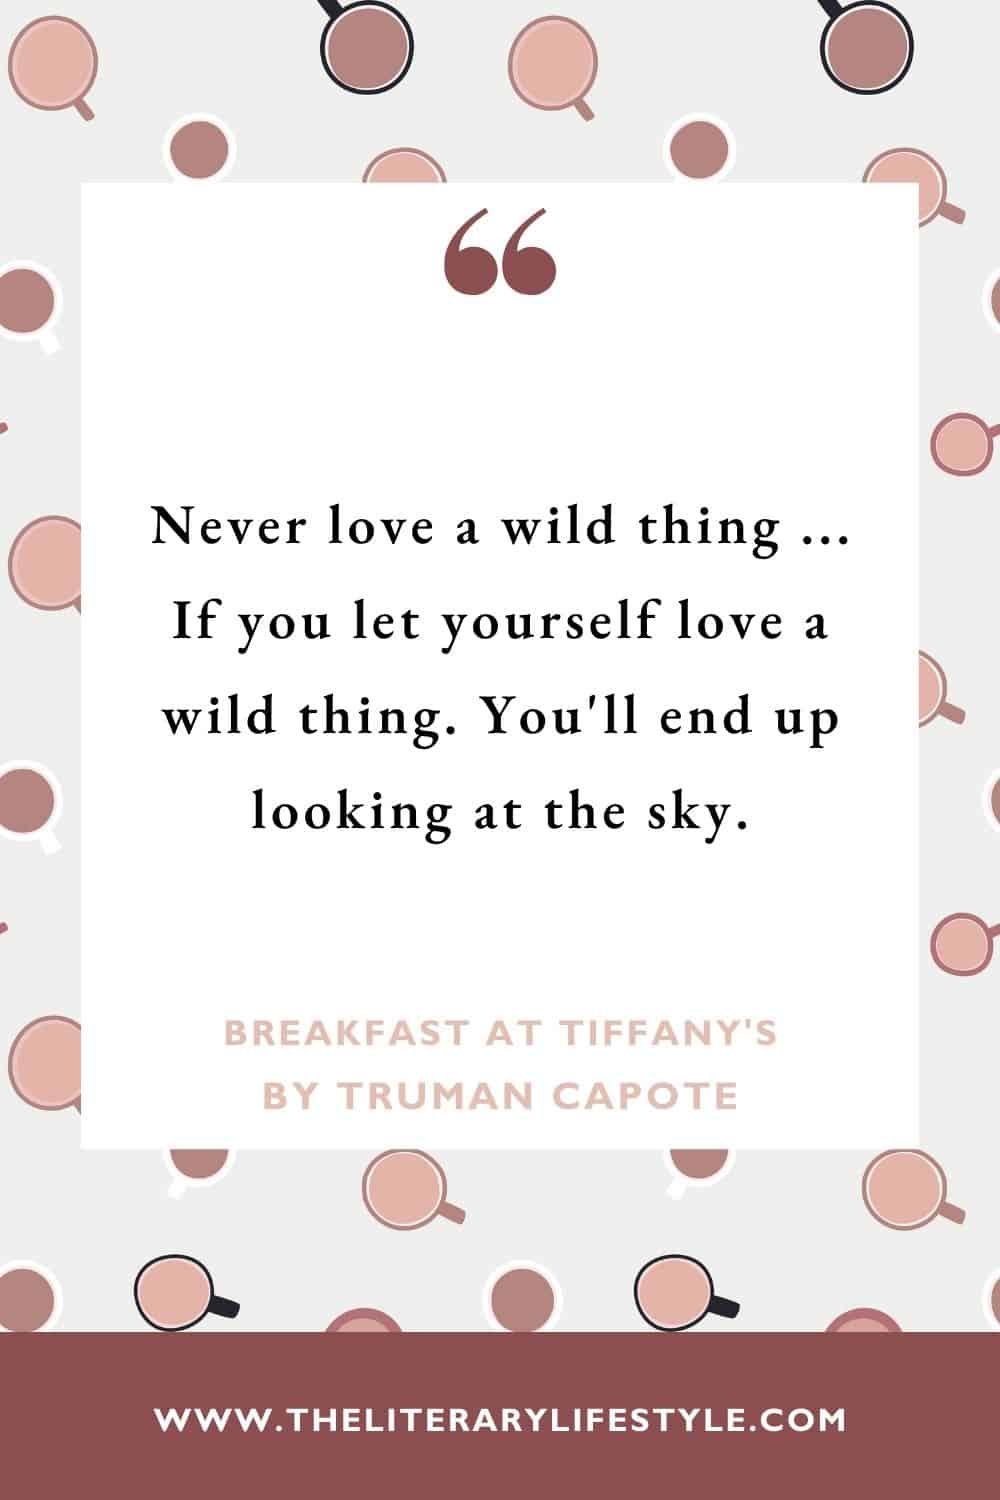 breakfast at tiffanys quote by truman capote